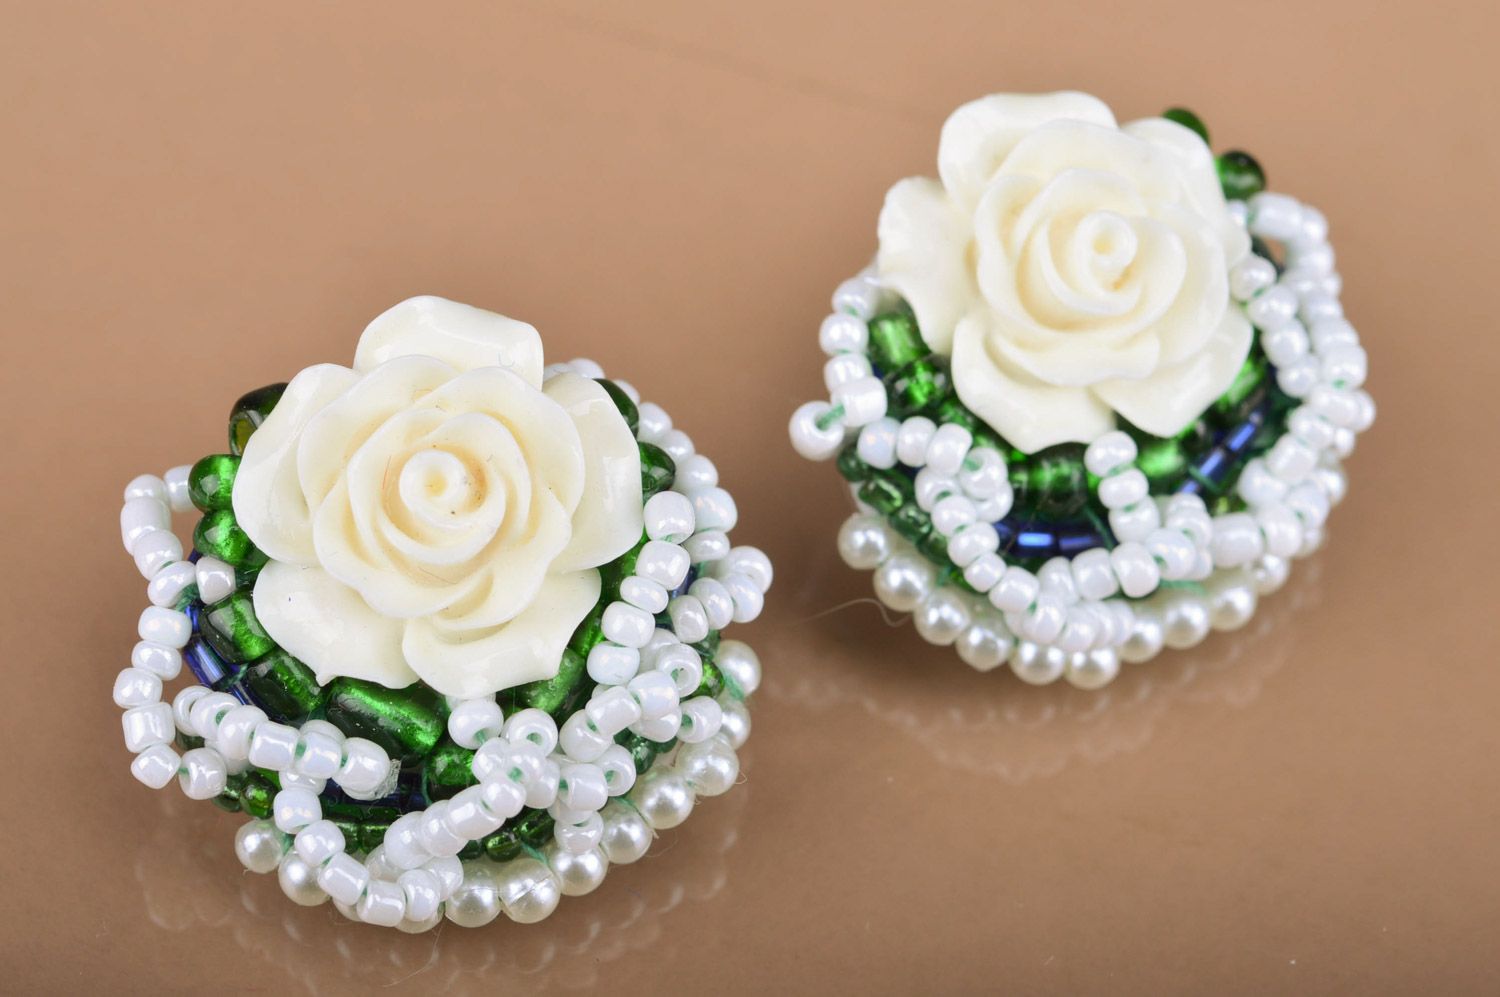 Handmade festive large white and green beaded stud earrings with roses photo 2